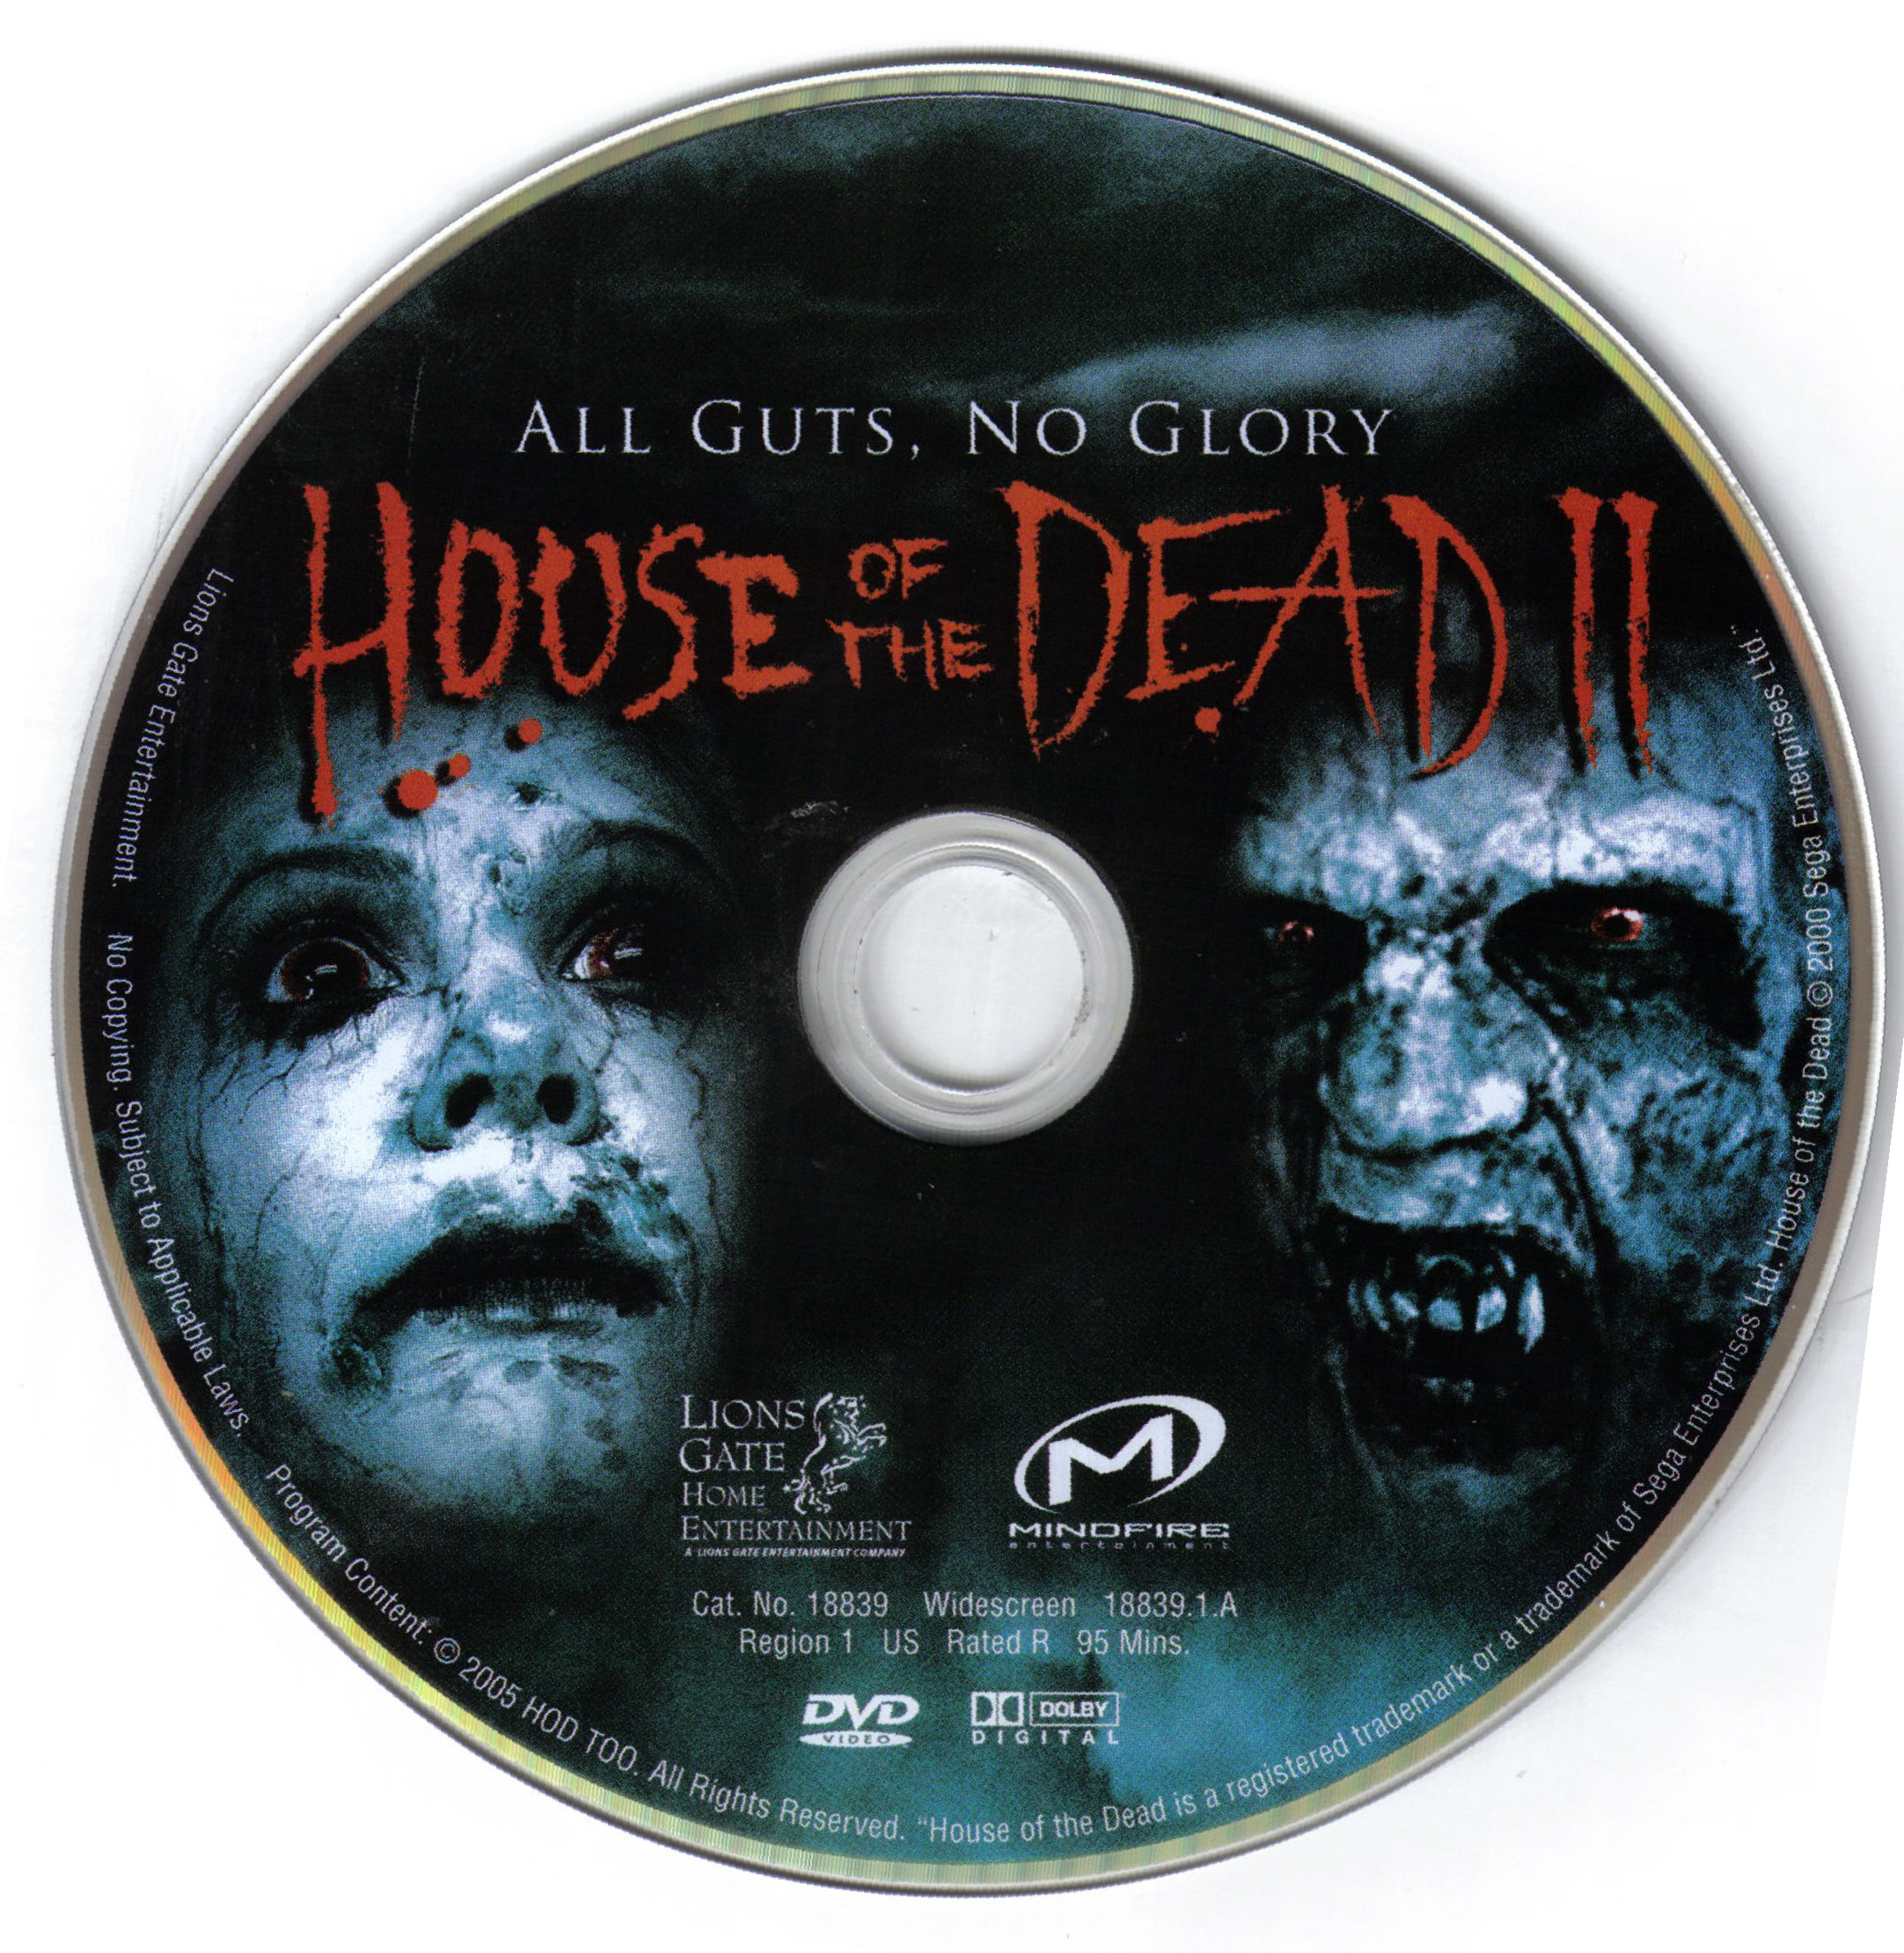 the house of the dead 3 no cd crack